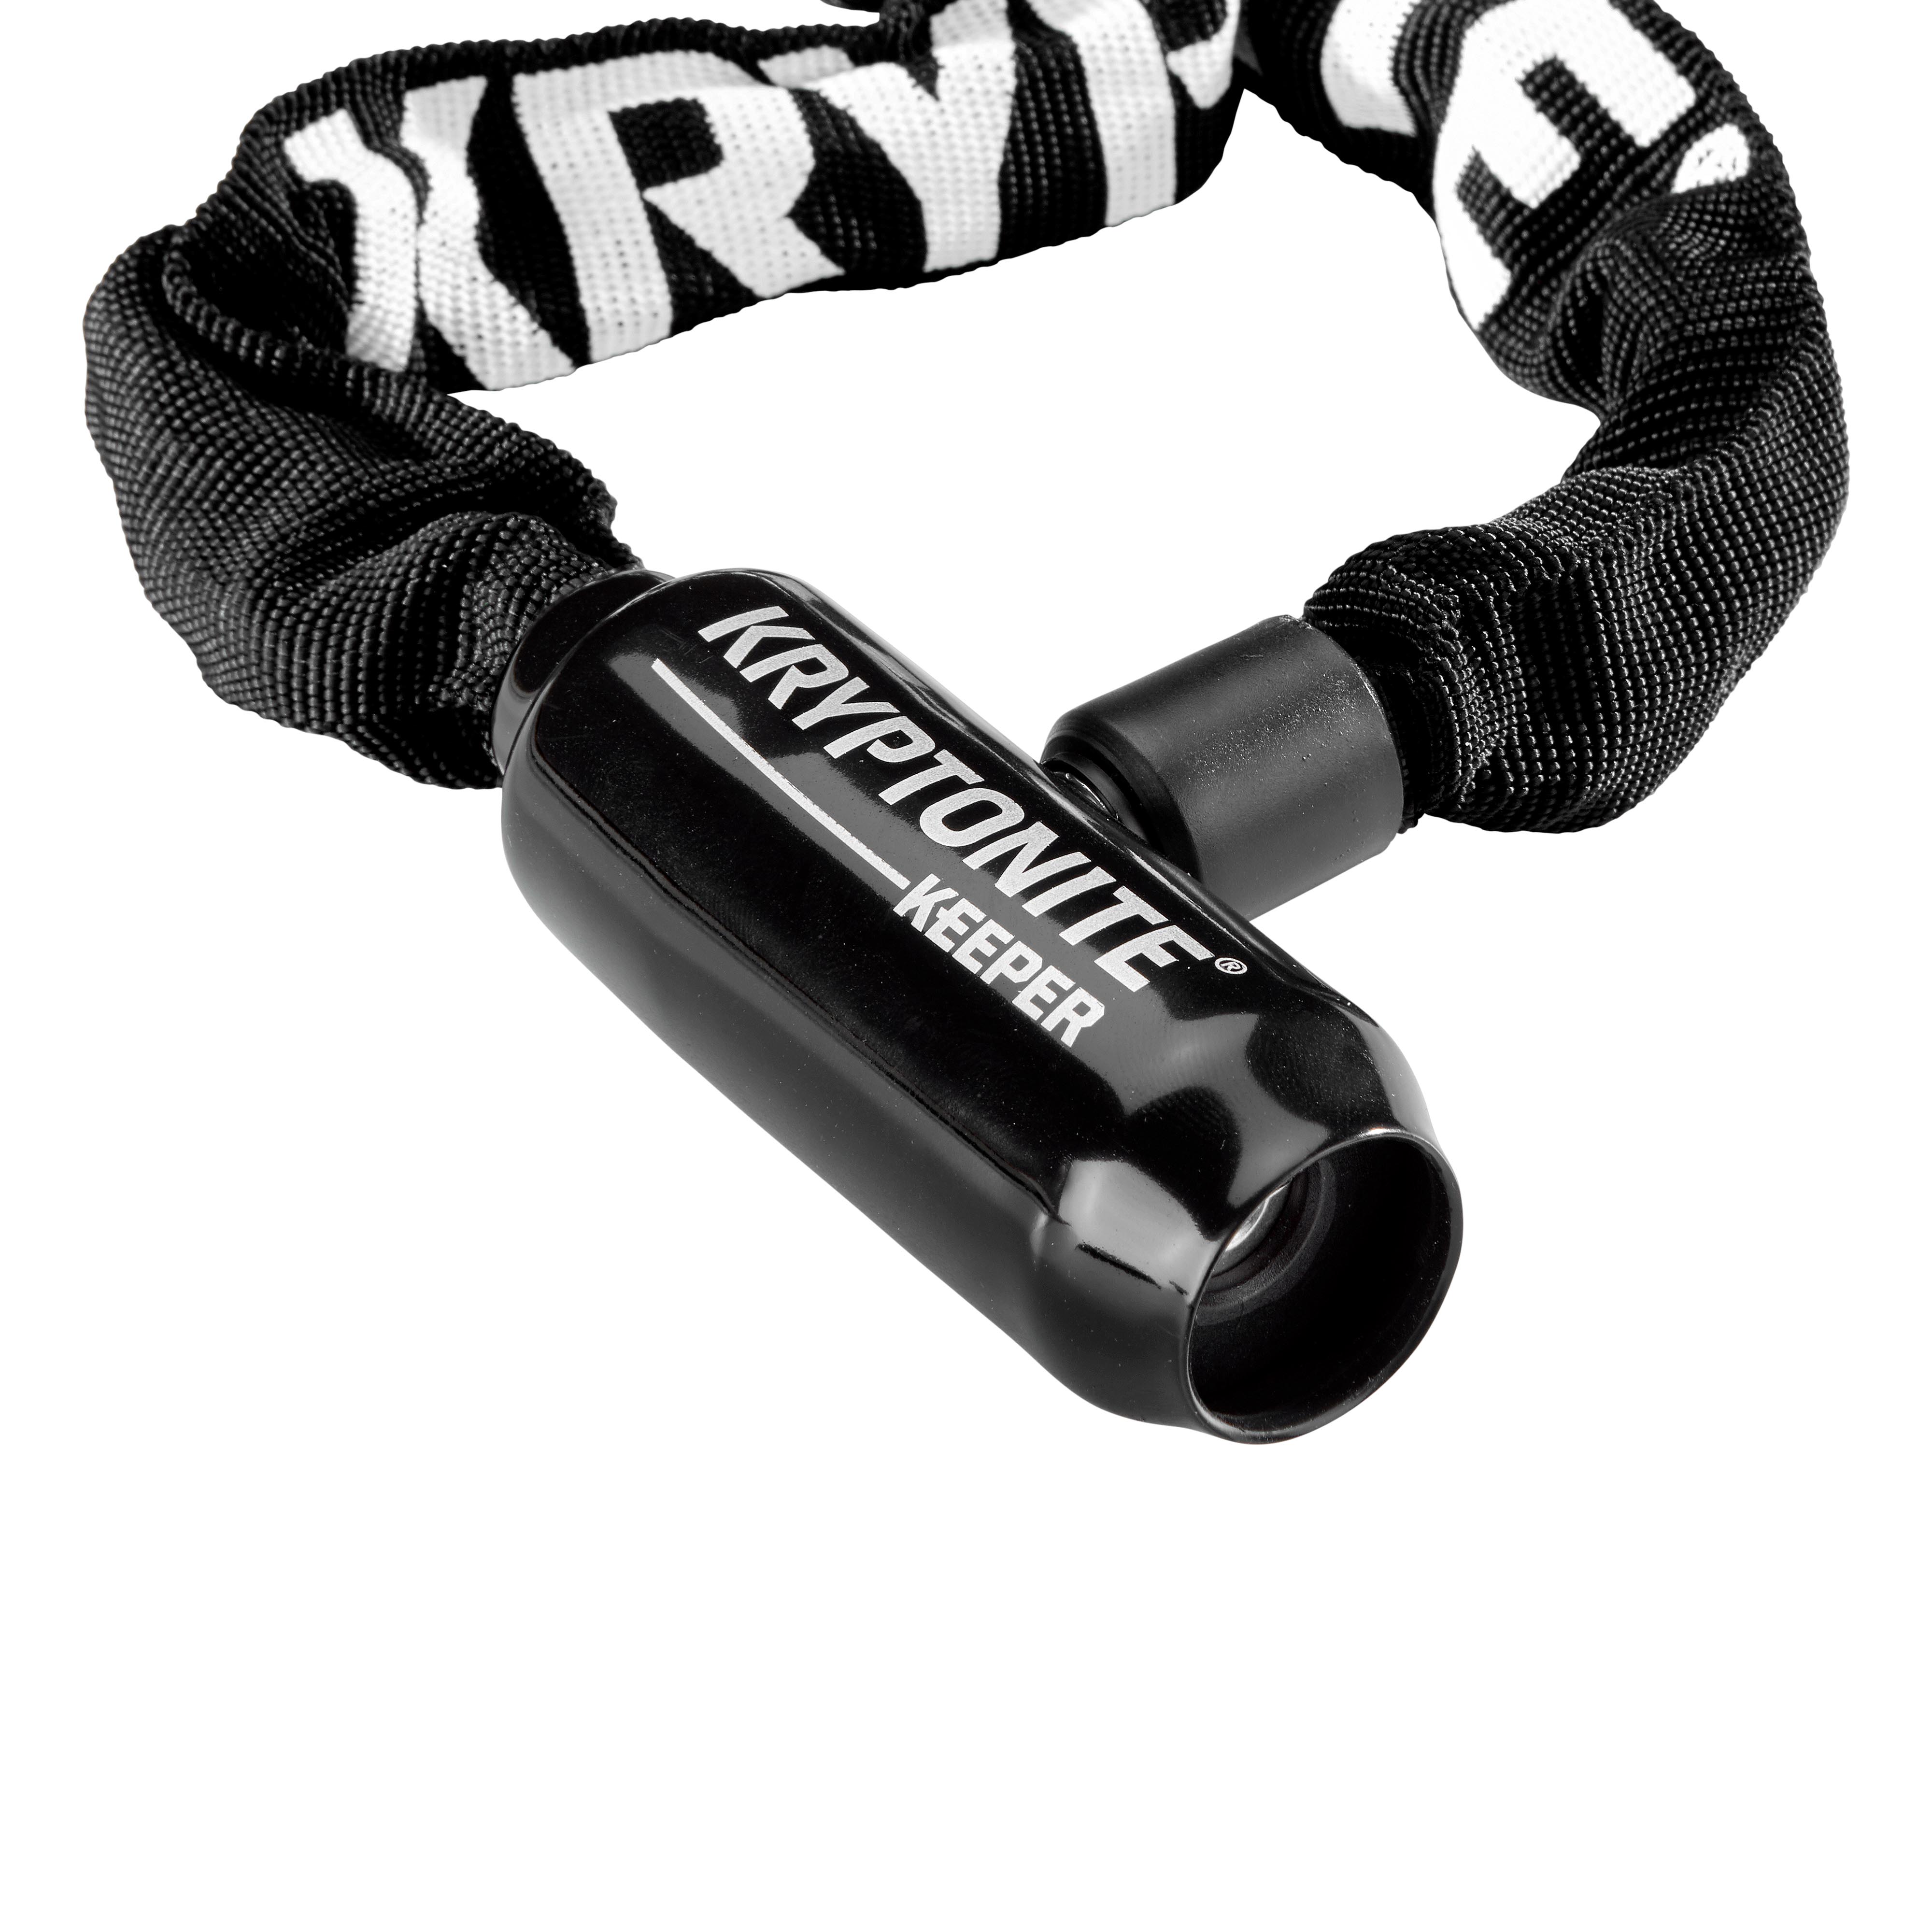 Tested: Kryptonite Keeper 785 review